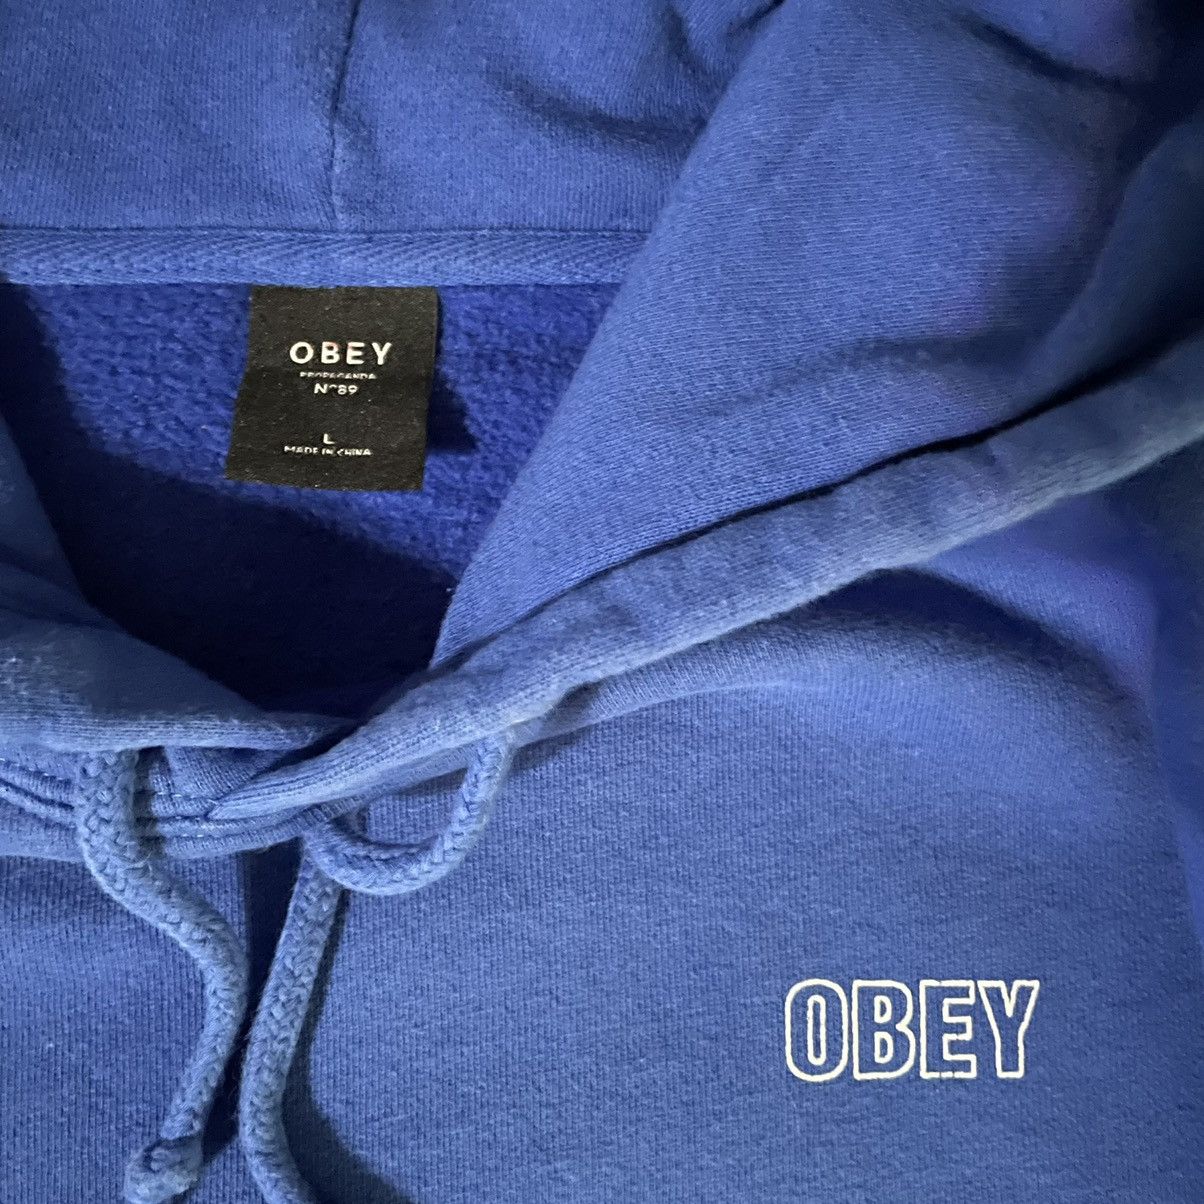 Obey Obey Hoodie Size US S / EU 44-46 / 1 - 3 Preview